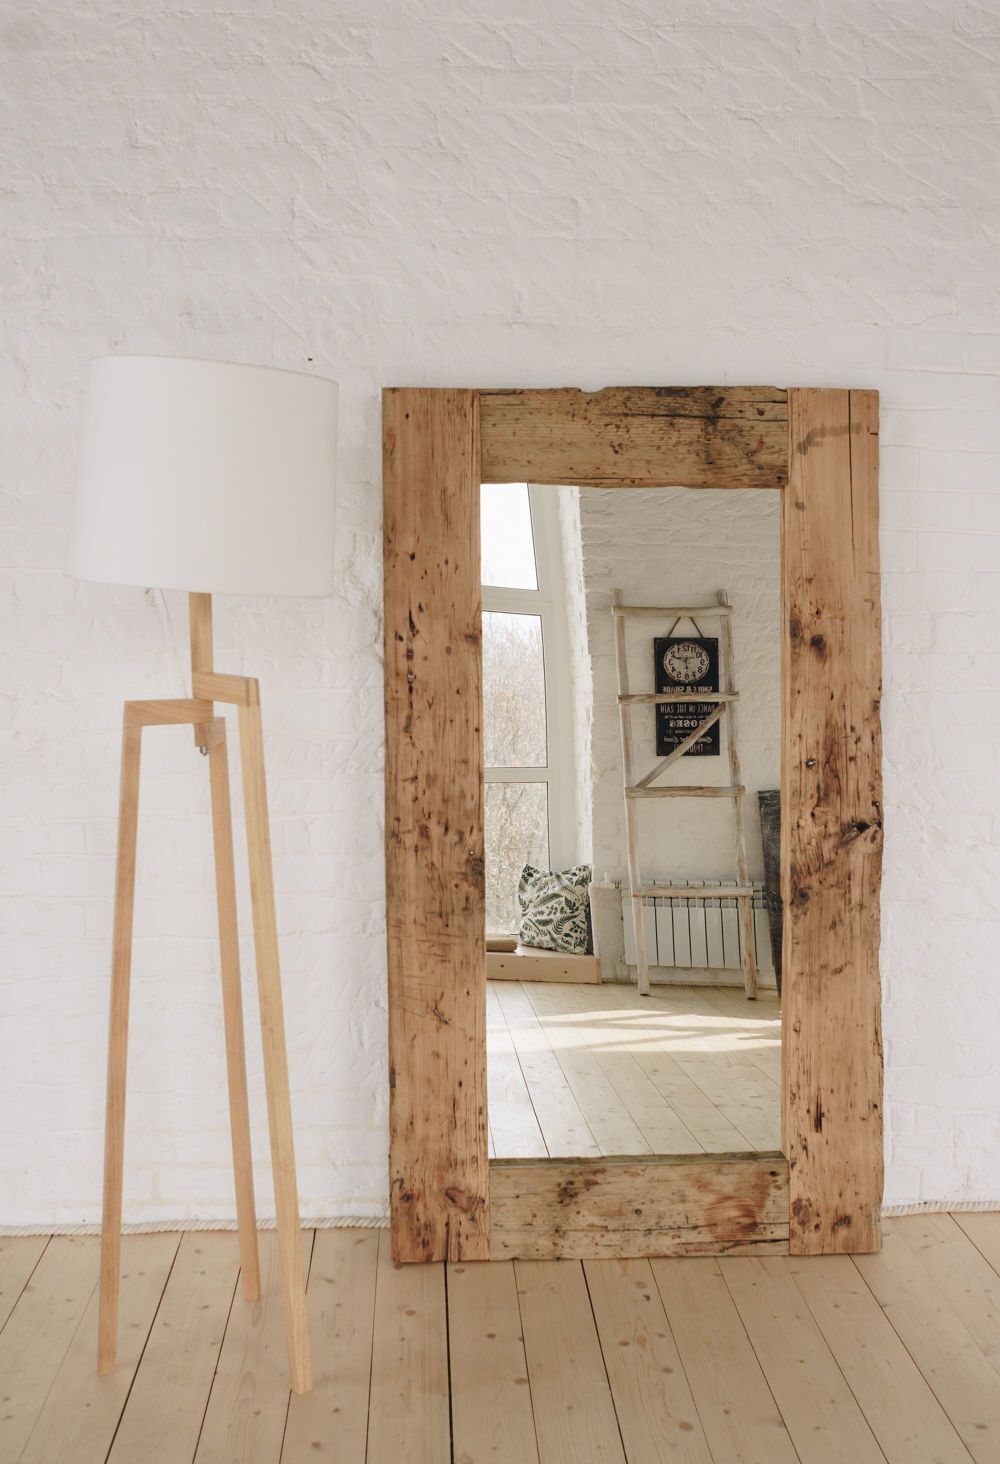 A Classic Wooden Frame for Rustic Impression